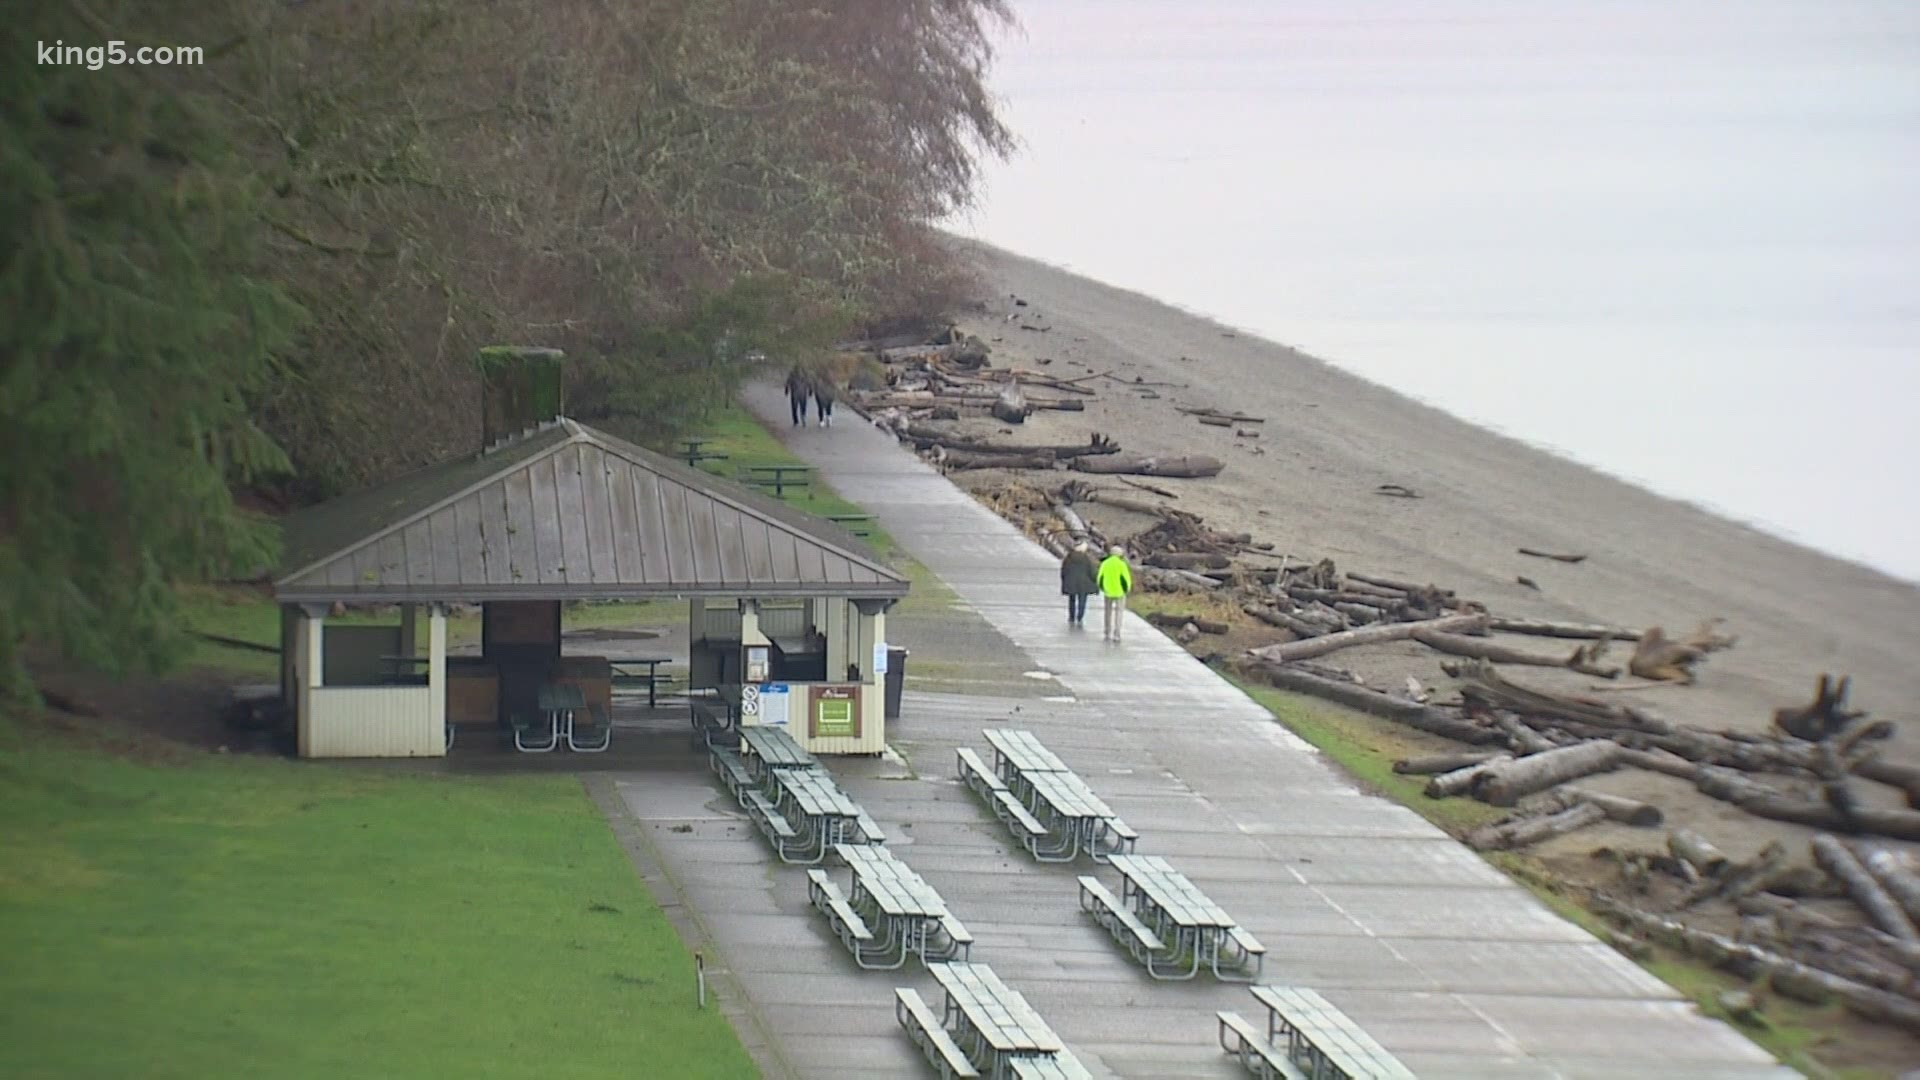 Tacoma leaders will revamp the waterfront park to address future rising sea levels due to climate change.